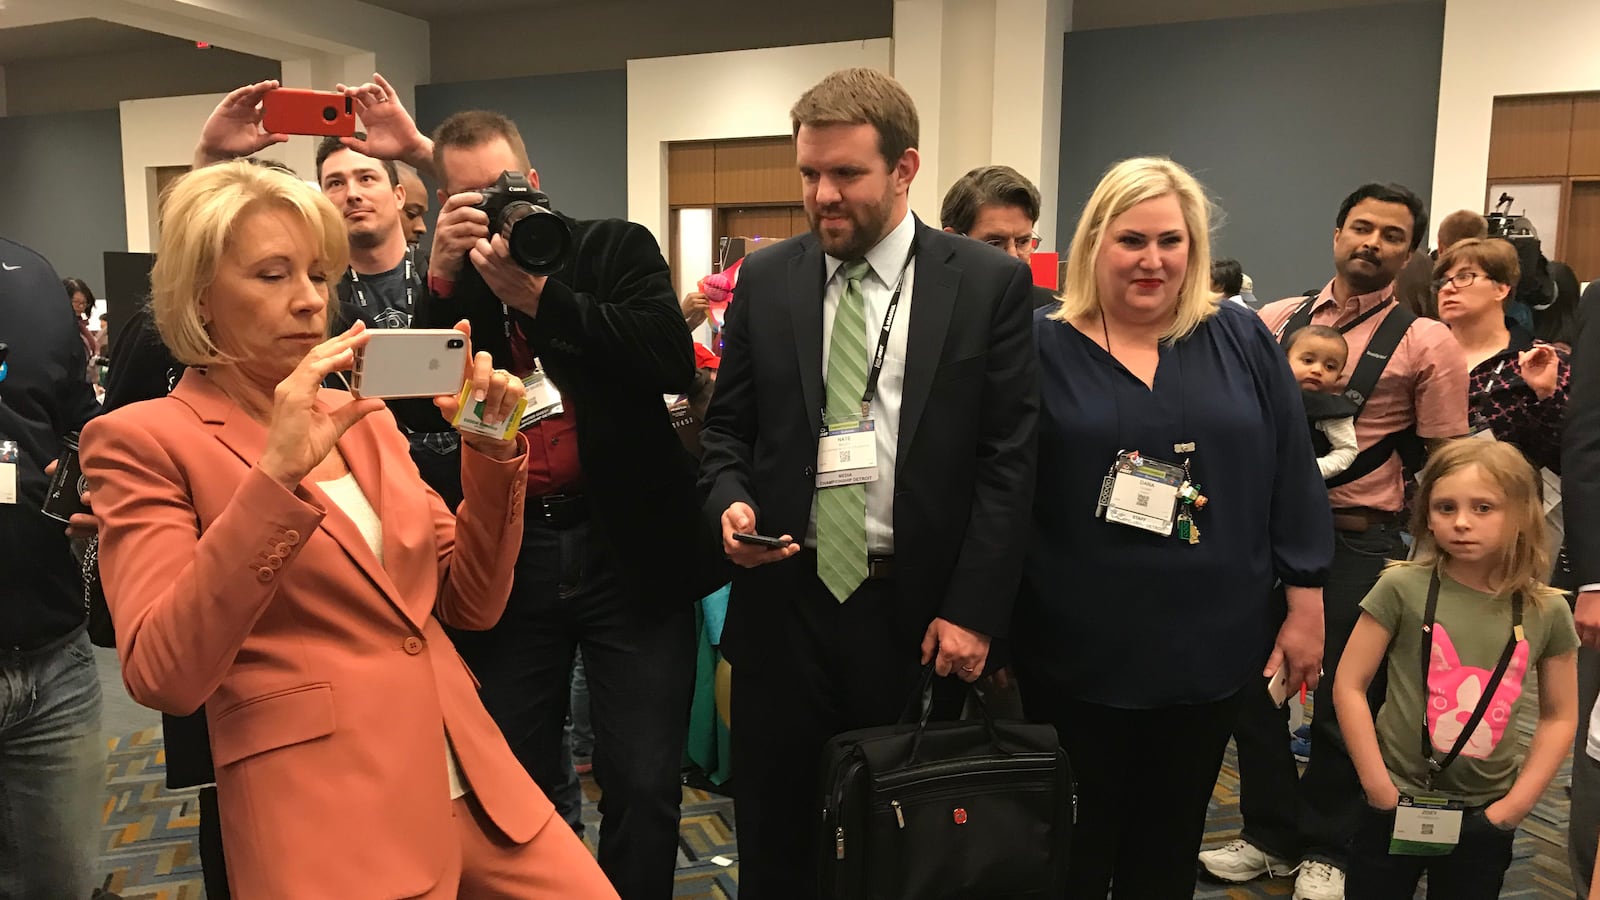 U.S. Education Secretary Betsy DeVos takes pictures on her phone during the FIRST Robotics World Championship, held in Detroit on April 27, 2018.